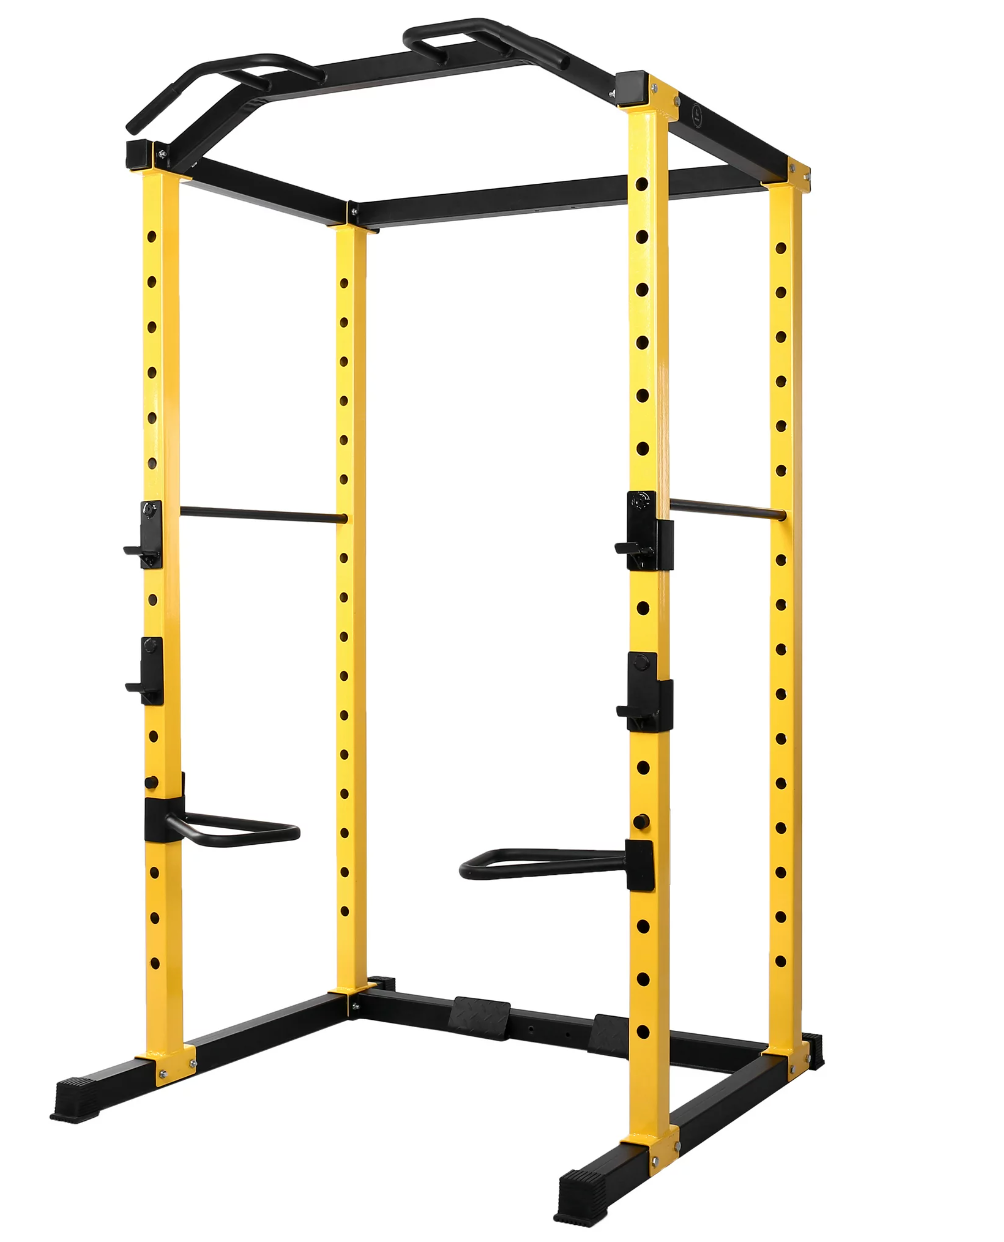 BalanceFrom PC-1 Series 1000lb Capacity Multi-Function Adjustable Power Cage $230 w/ Shipping